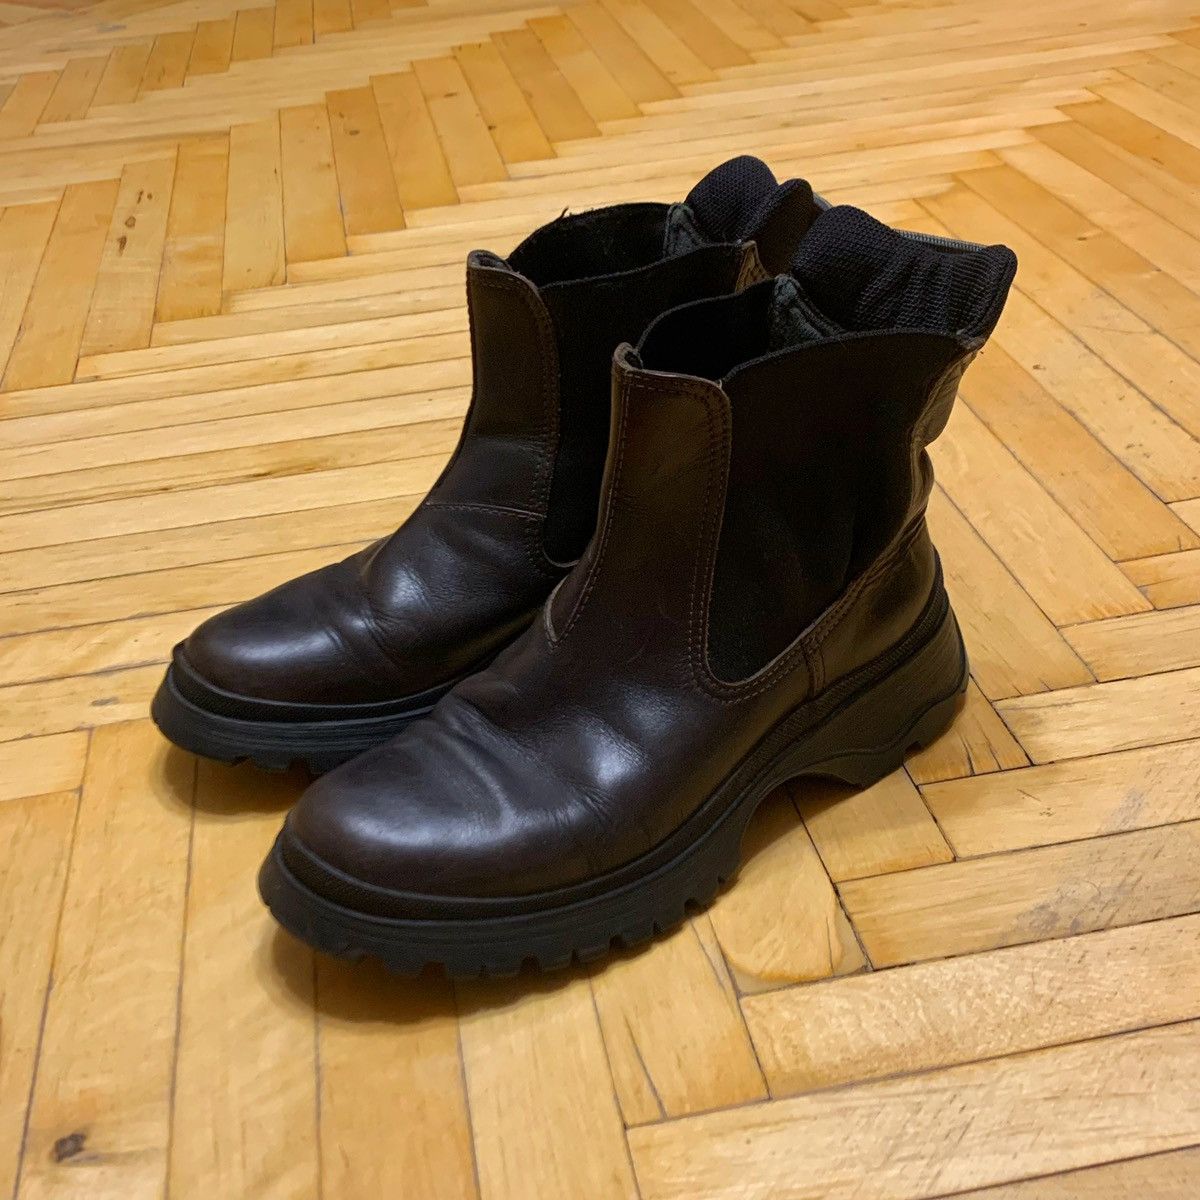 Prada Vintage Tractor leather boots | Grailed